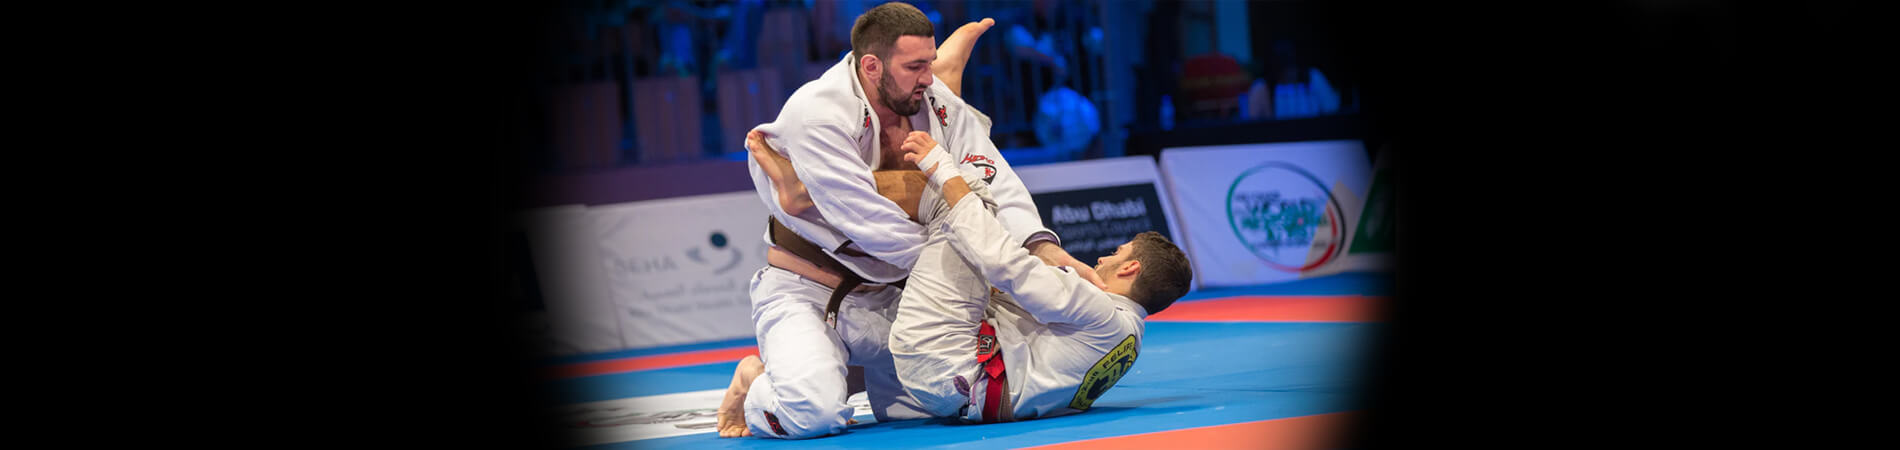 17 IBJJF Competition Rules to Remember for All BJJ Athletes